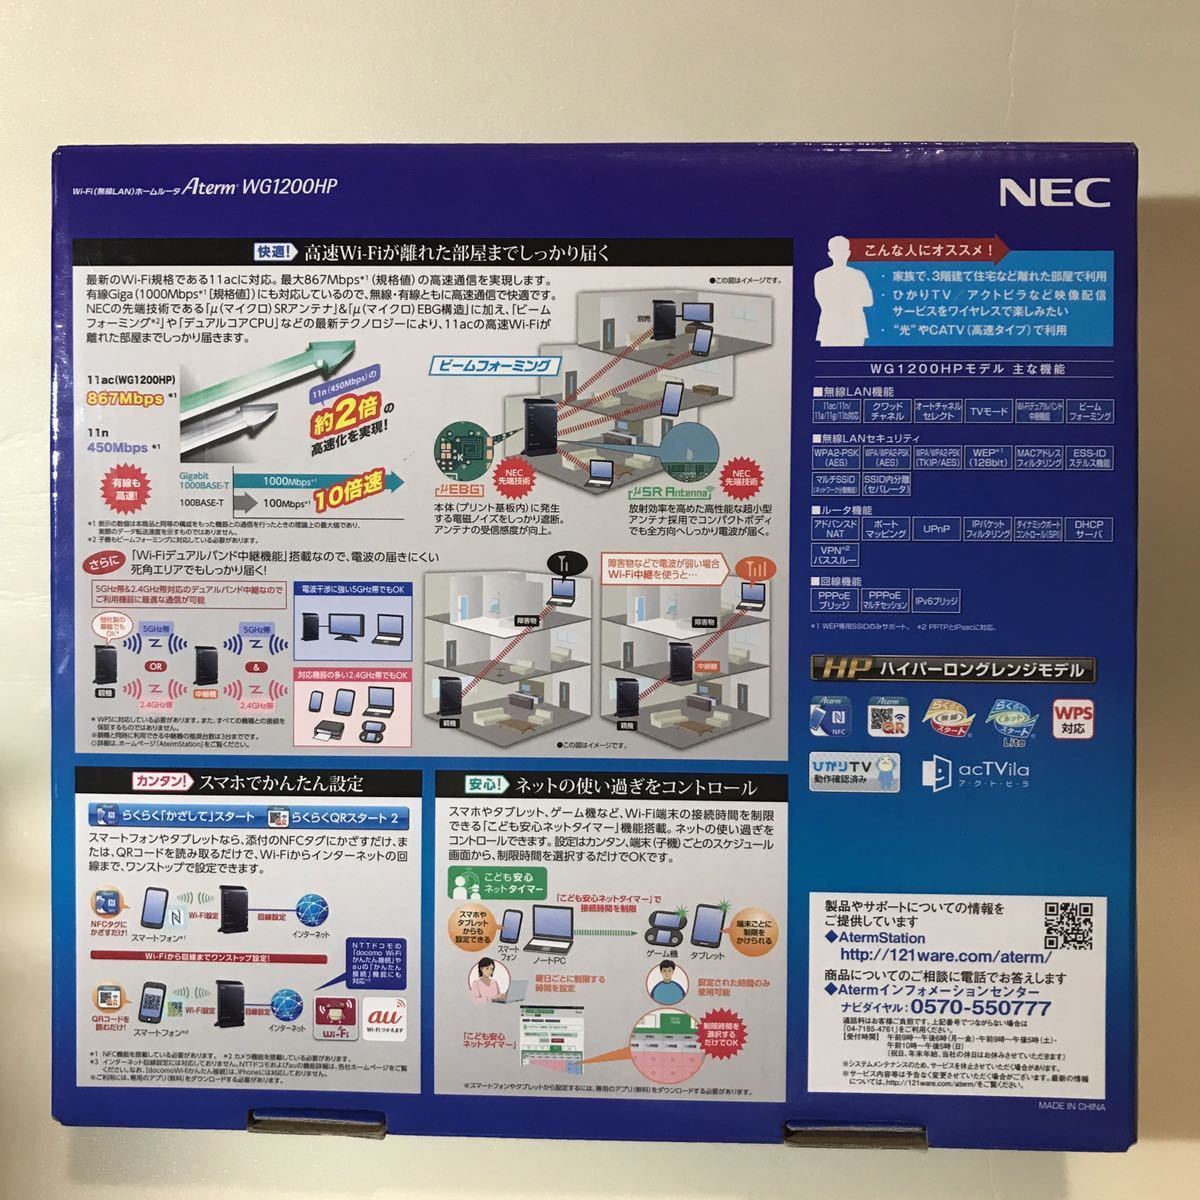 NEC Wi-fi 無線LAN ホームルーター Aterm WG1200HP PA-WG1200HP 867Mbps+300Mbps 有線ギガ対応のスタンダードモデル